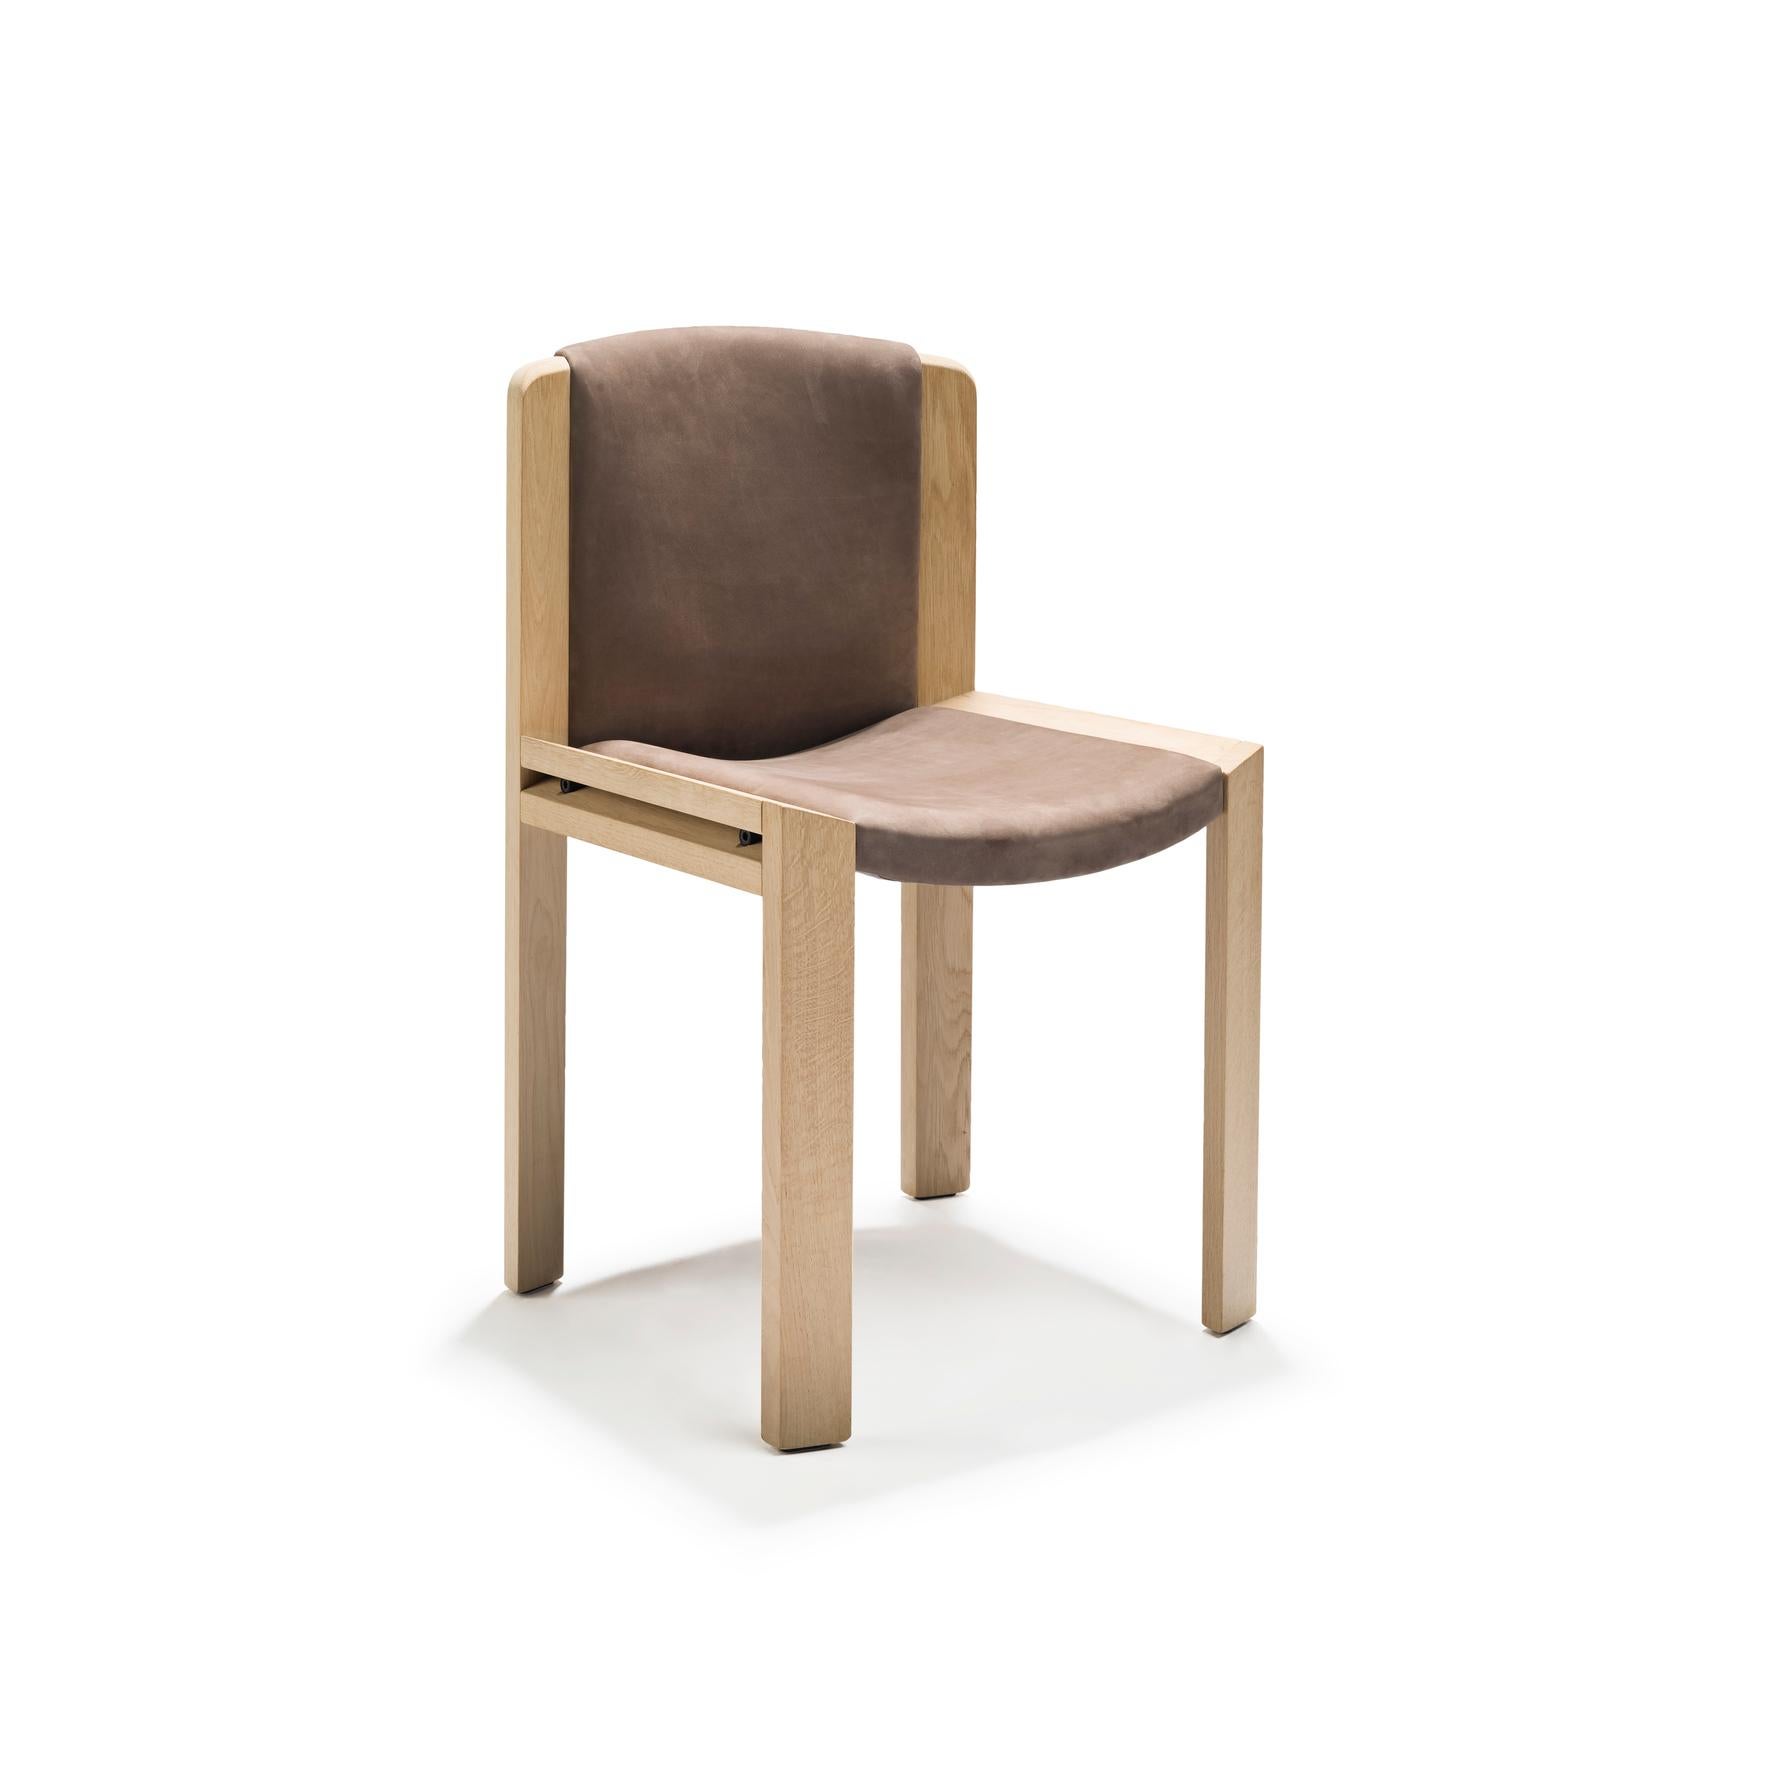 Contemporary Joe Colombo 'Chair 300' Wood and Sørensen Leather by Karakter For Sale